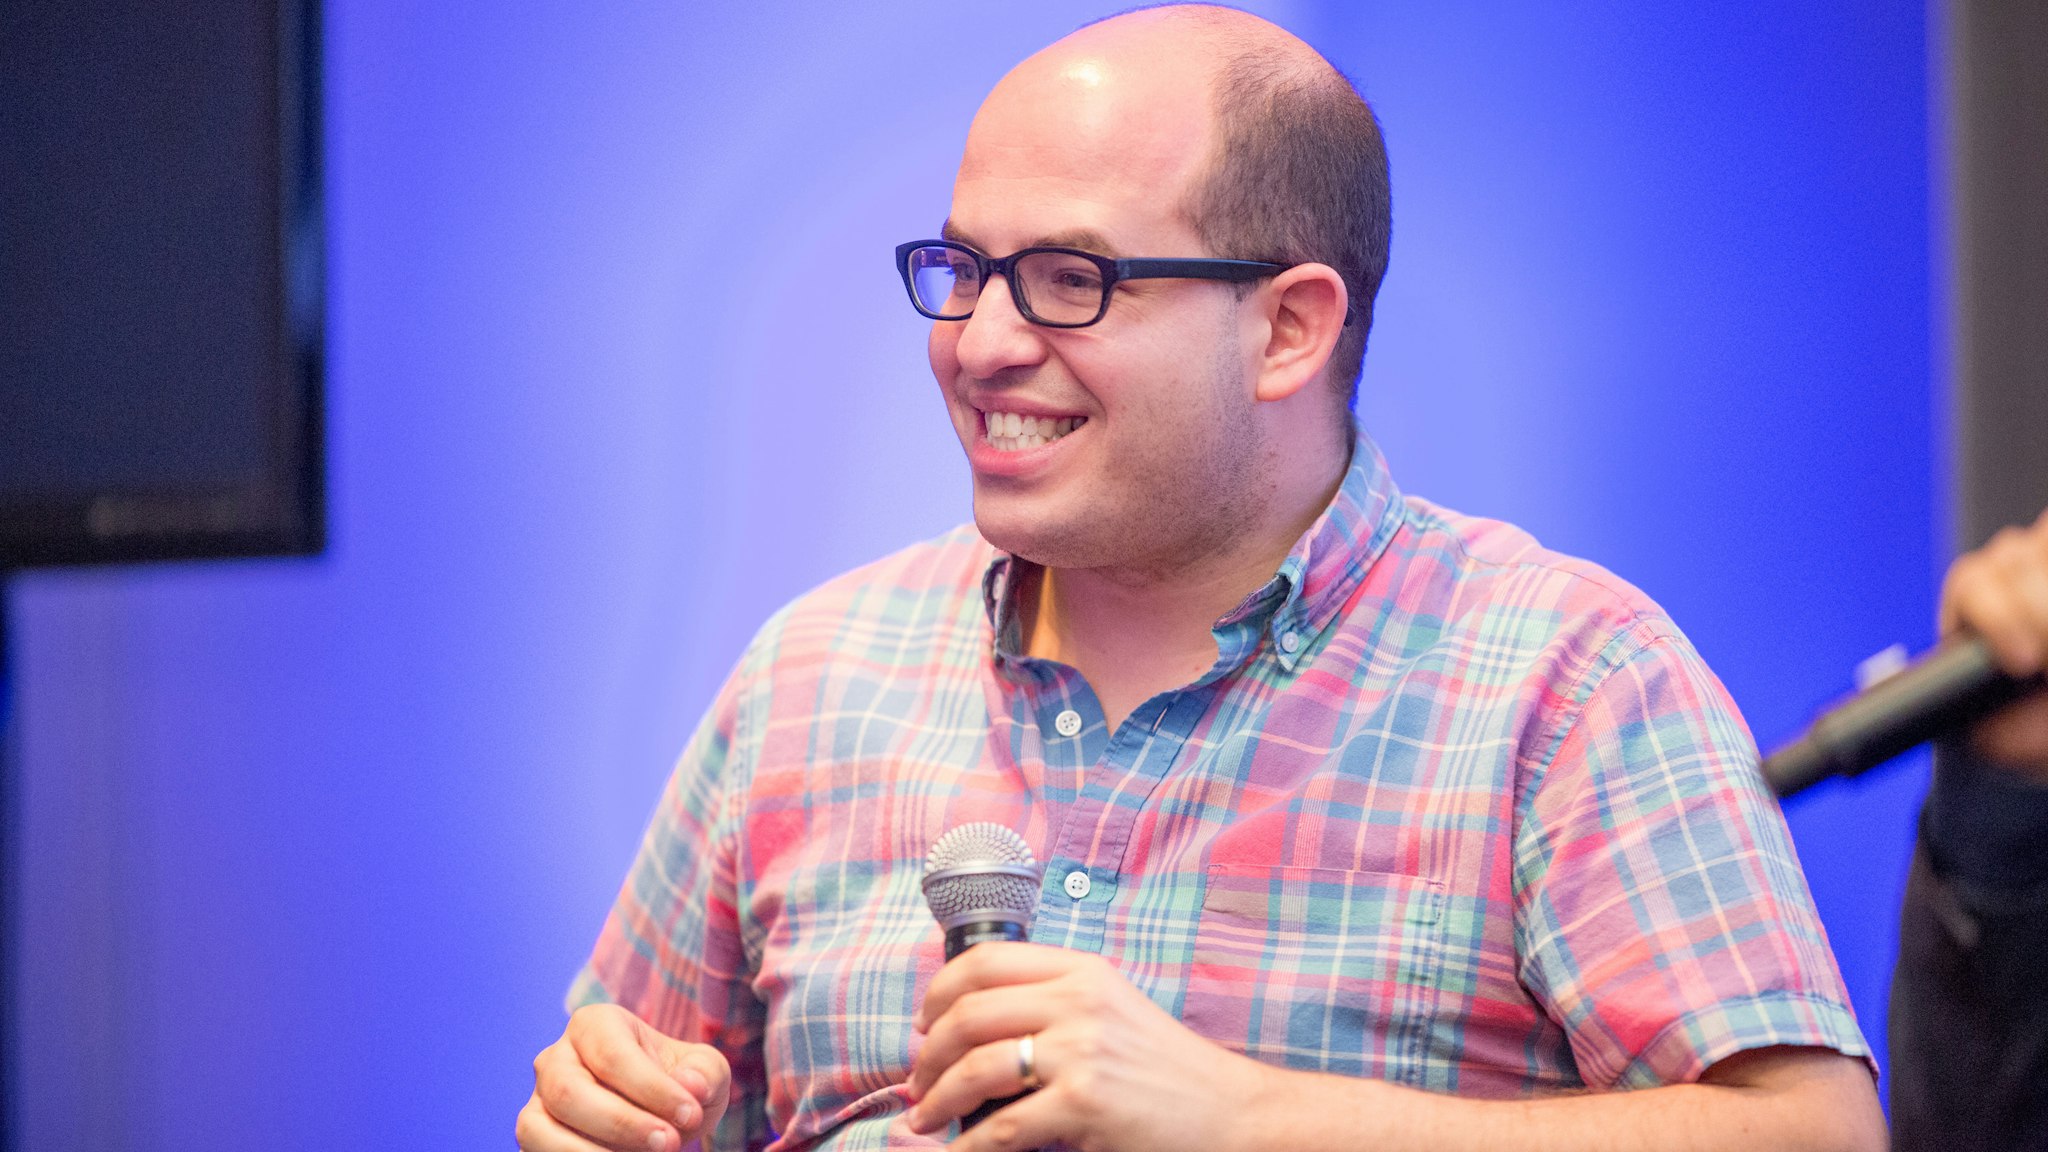 Brian Stelter attends EPIX's Deep Web Panel and Reception during the 2015 SXSW Music, Film + Interactive Festival at the W Hotel on March 16, 2015 in Austin, Texas.